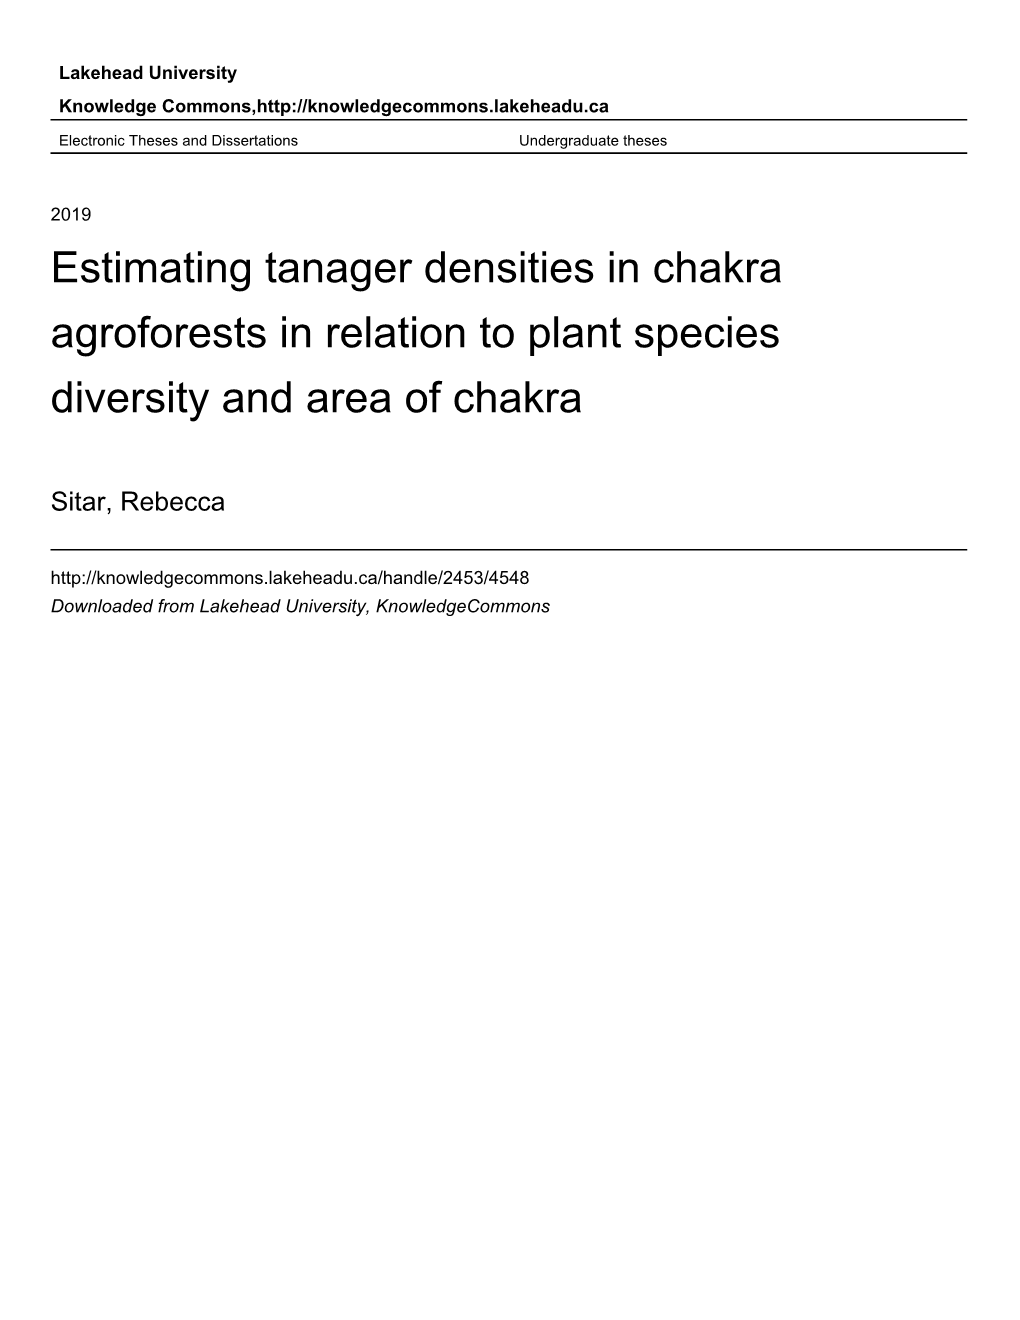 Estimating Tanager Densities in Chakra Agroforests in Relation to Plant Species Diversity and Area of Chakra